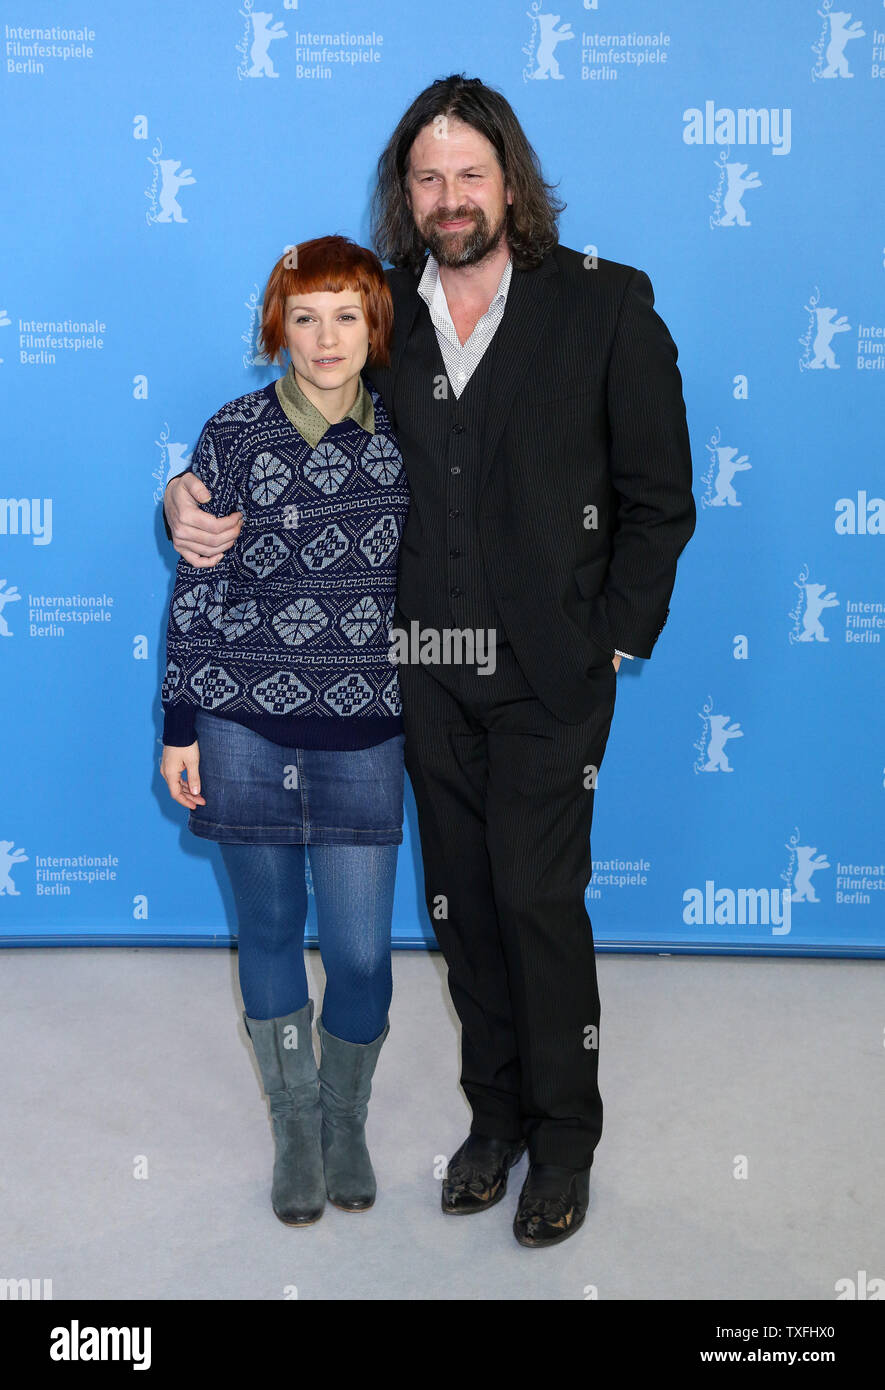 Veerle Baetens (L) and Johan Heldenbergh arrive at the photo call for the film 'The Broken Circle Breakdown' during the 63rd Berlinale Film Festival in Berlin on February 12, 2013.   UPI/David Silpa Stock Photo